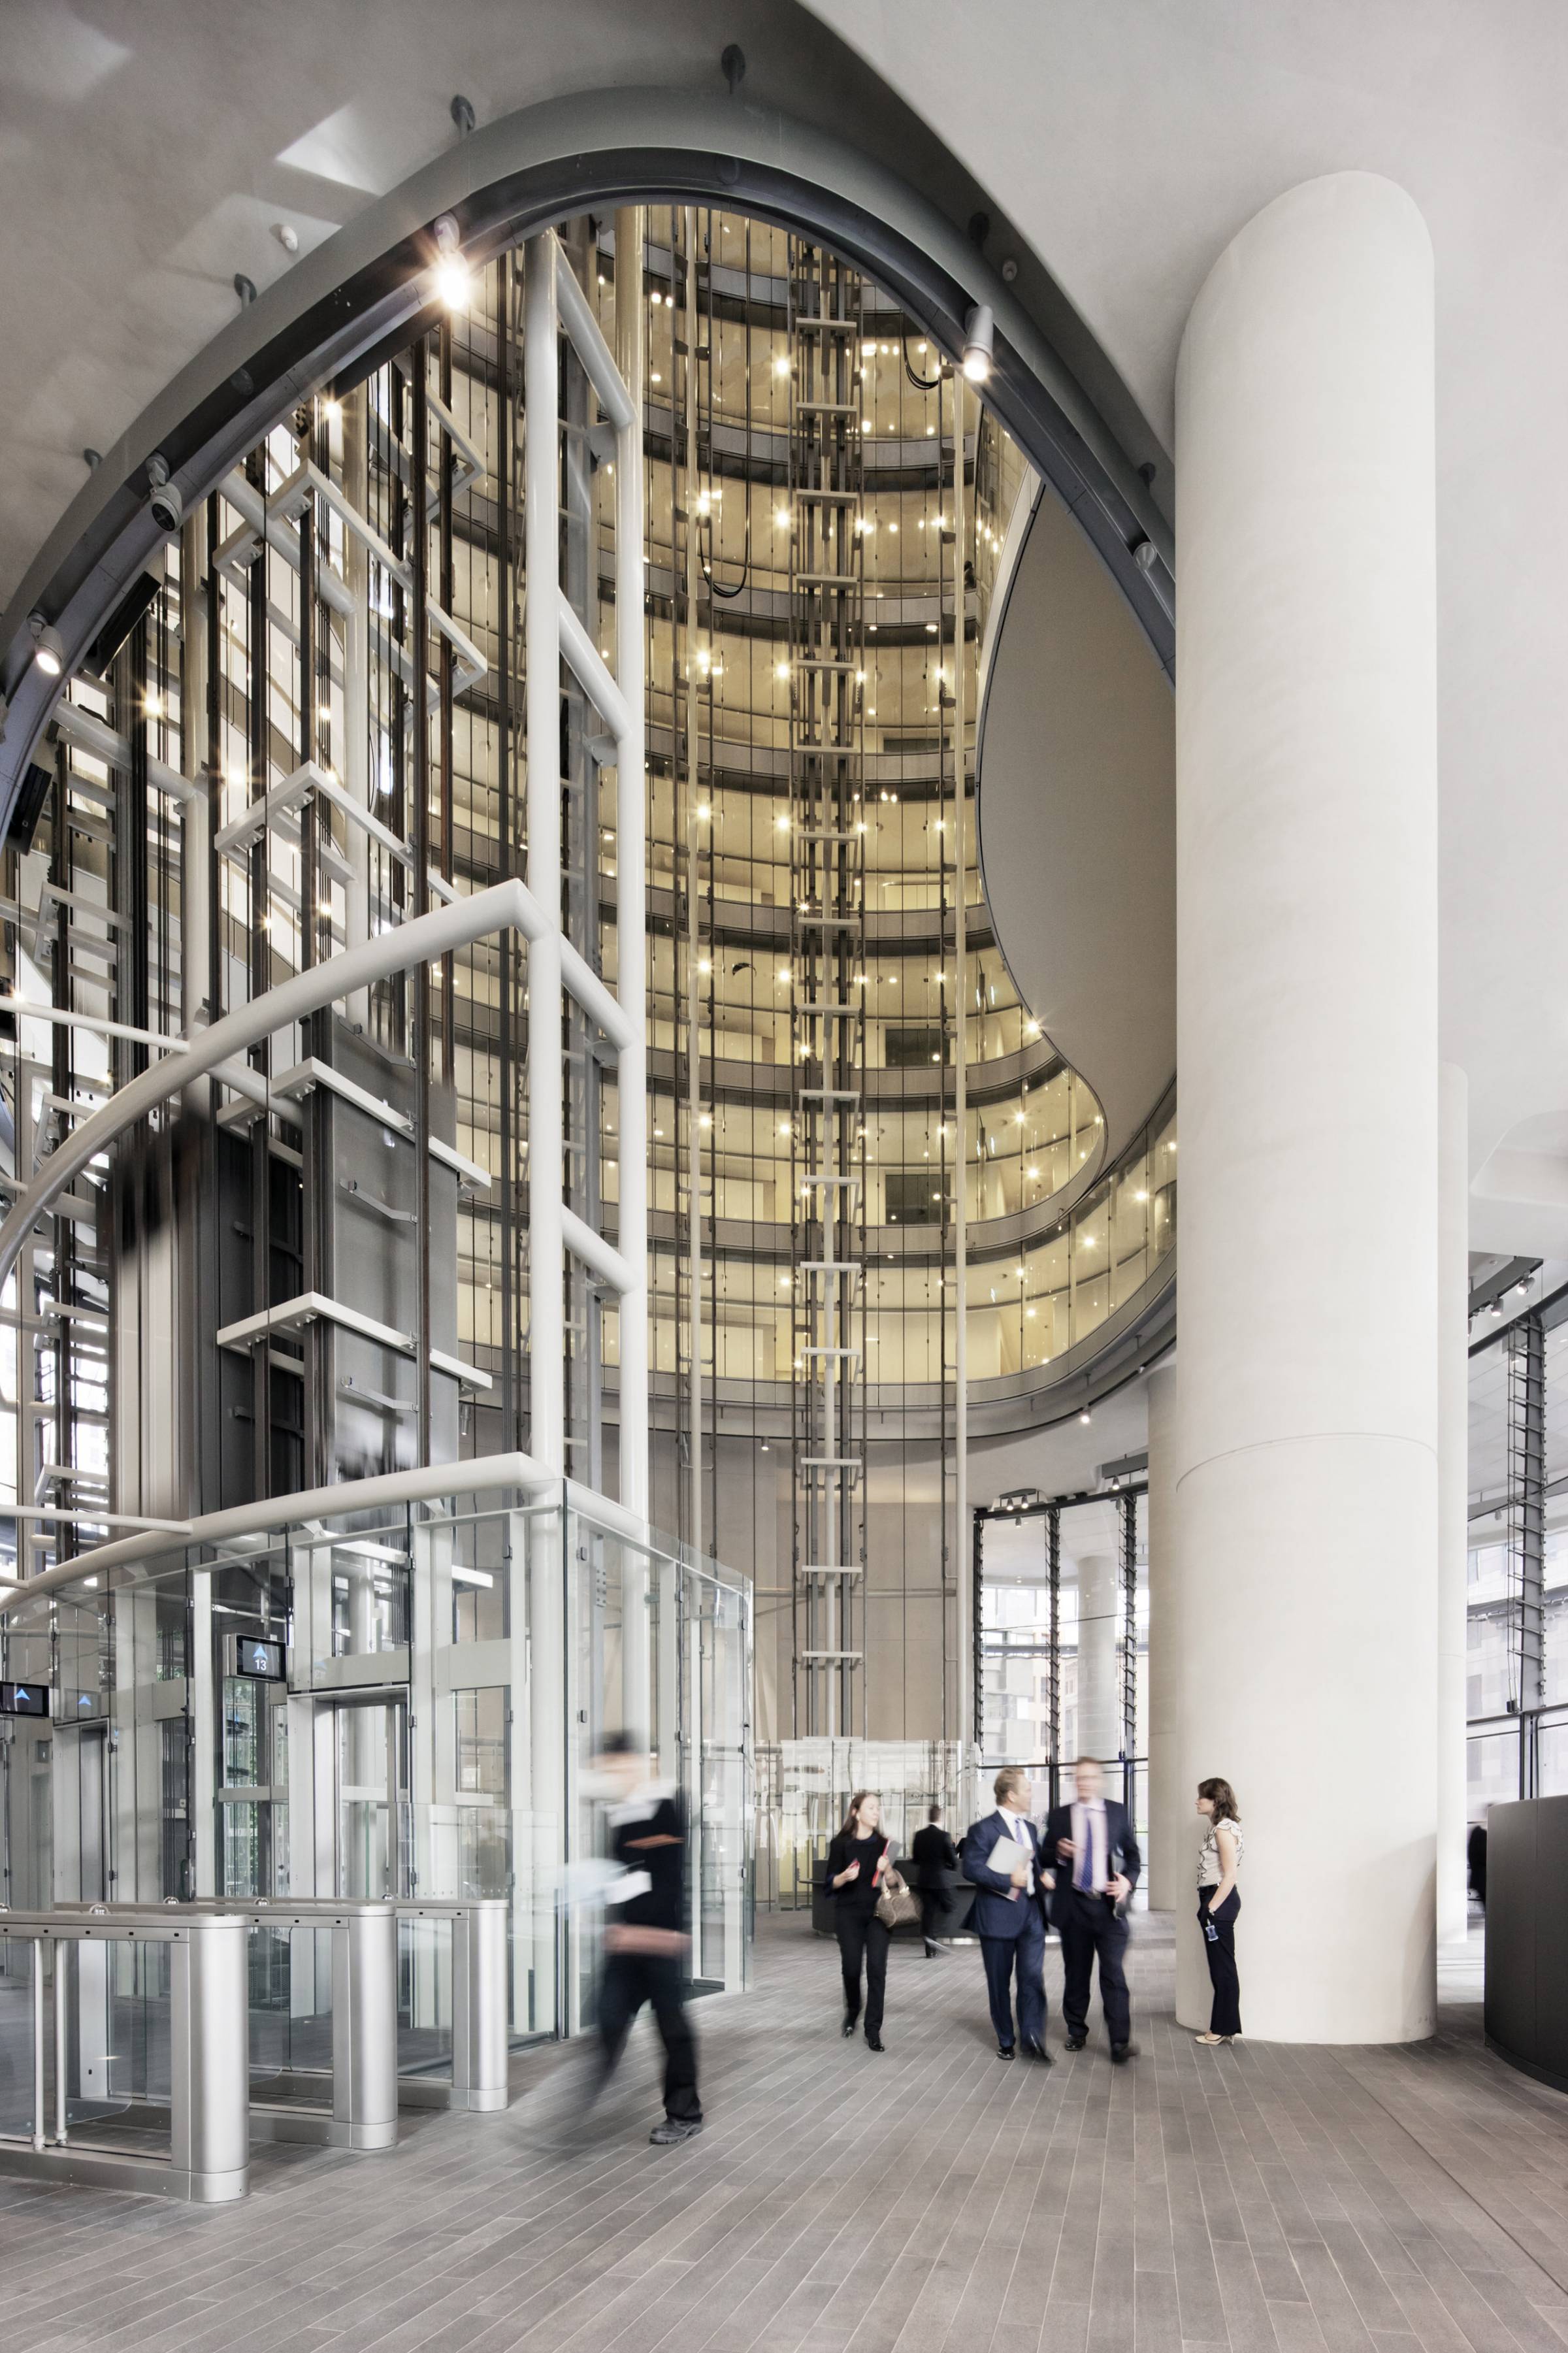 1 Bligh Street uses natural ventilation within the atrium and on balconies on every floor.